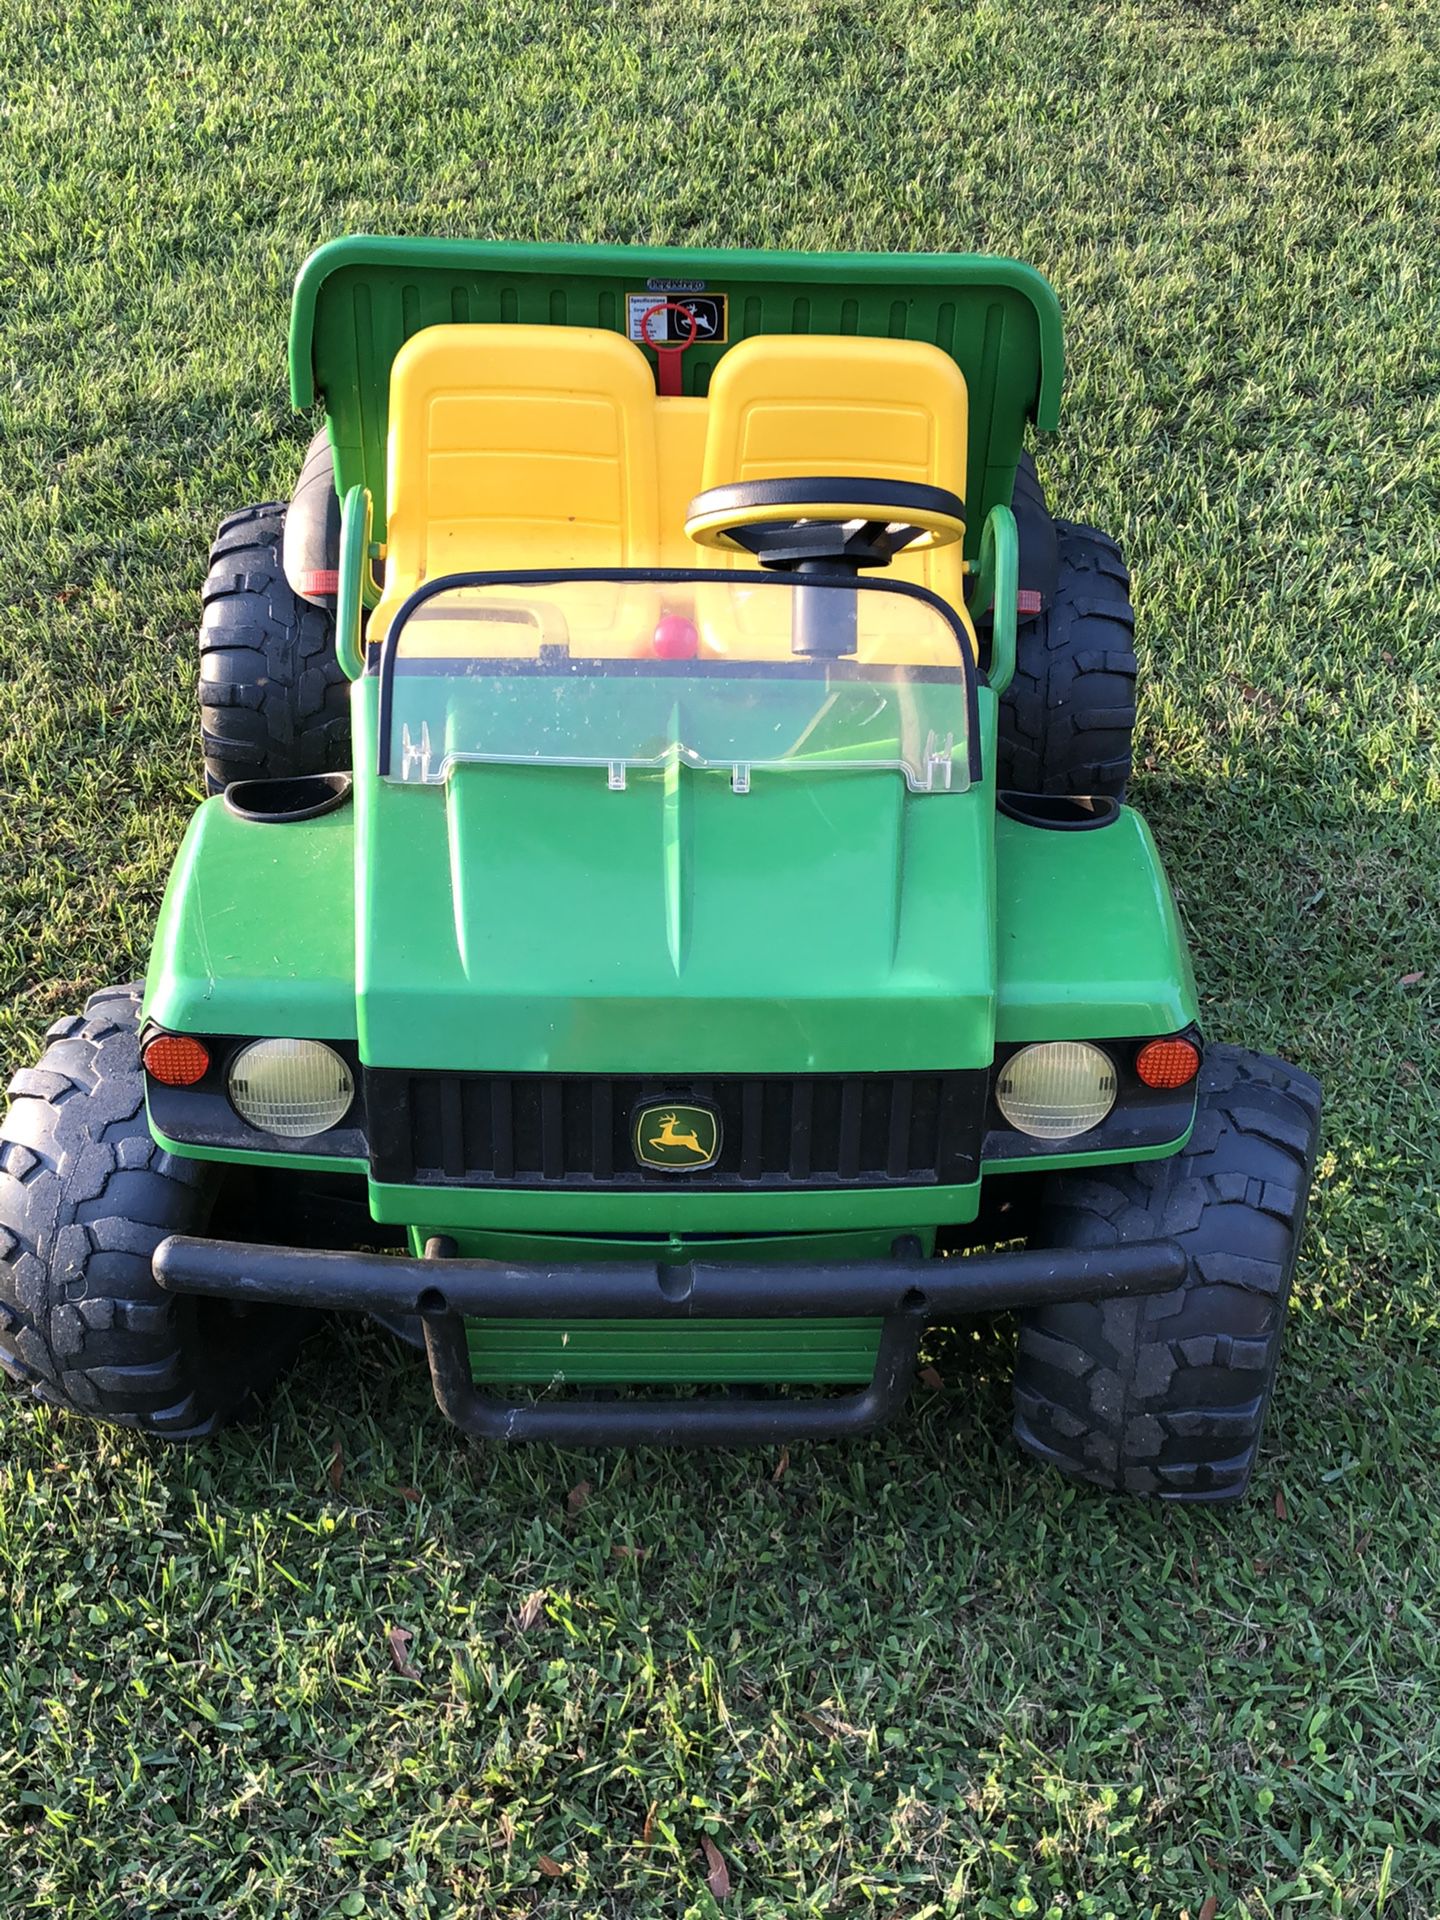 John Deere peg perego tractor 12 volt Ride on with brand new battery